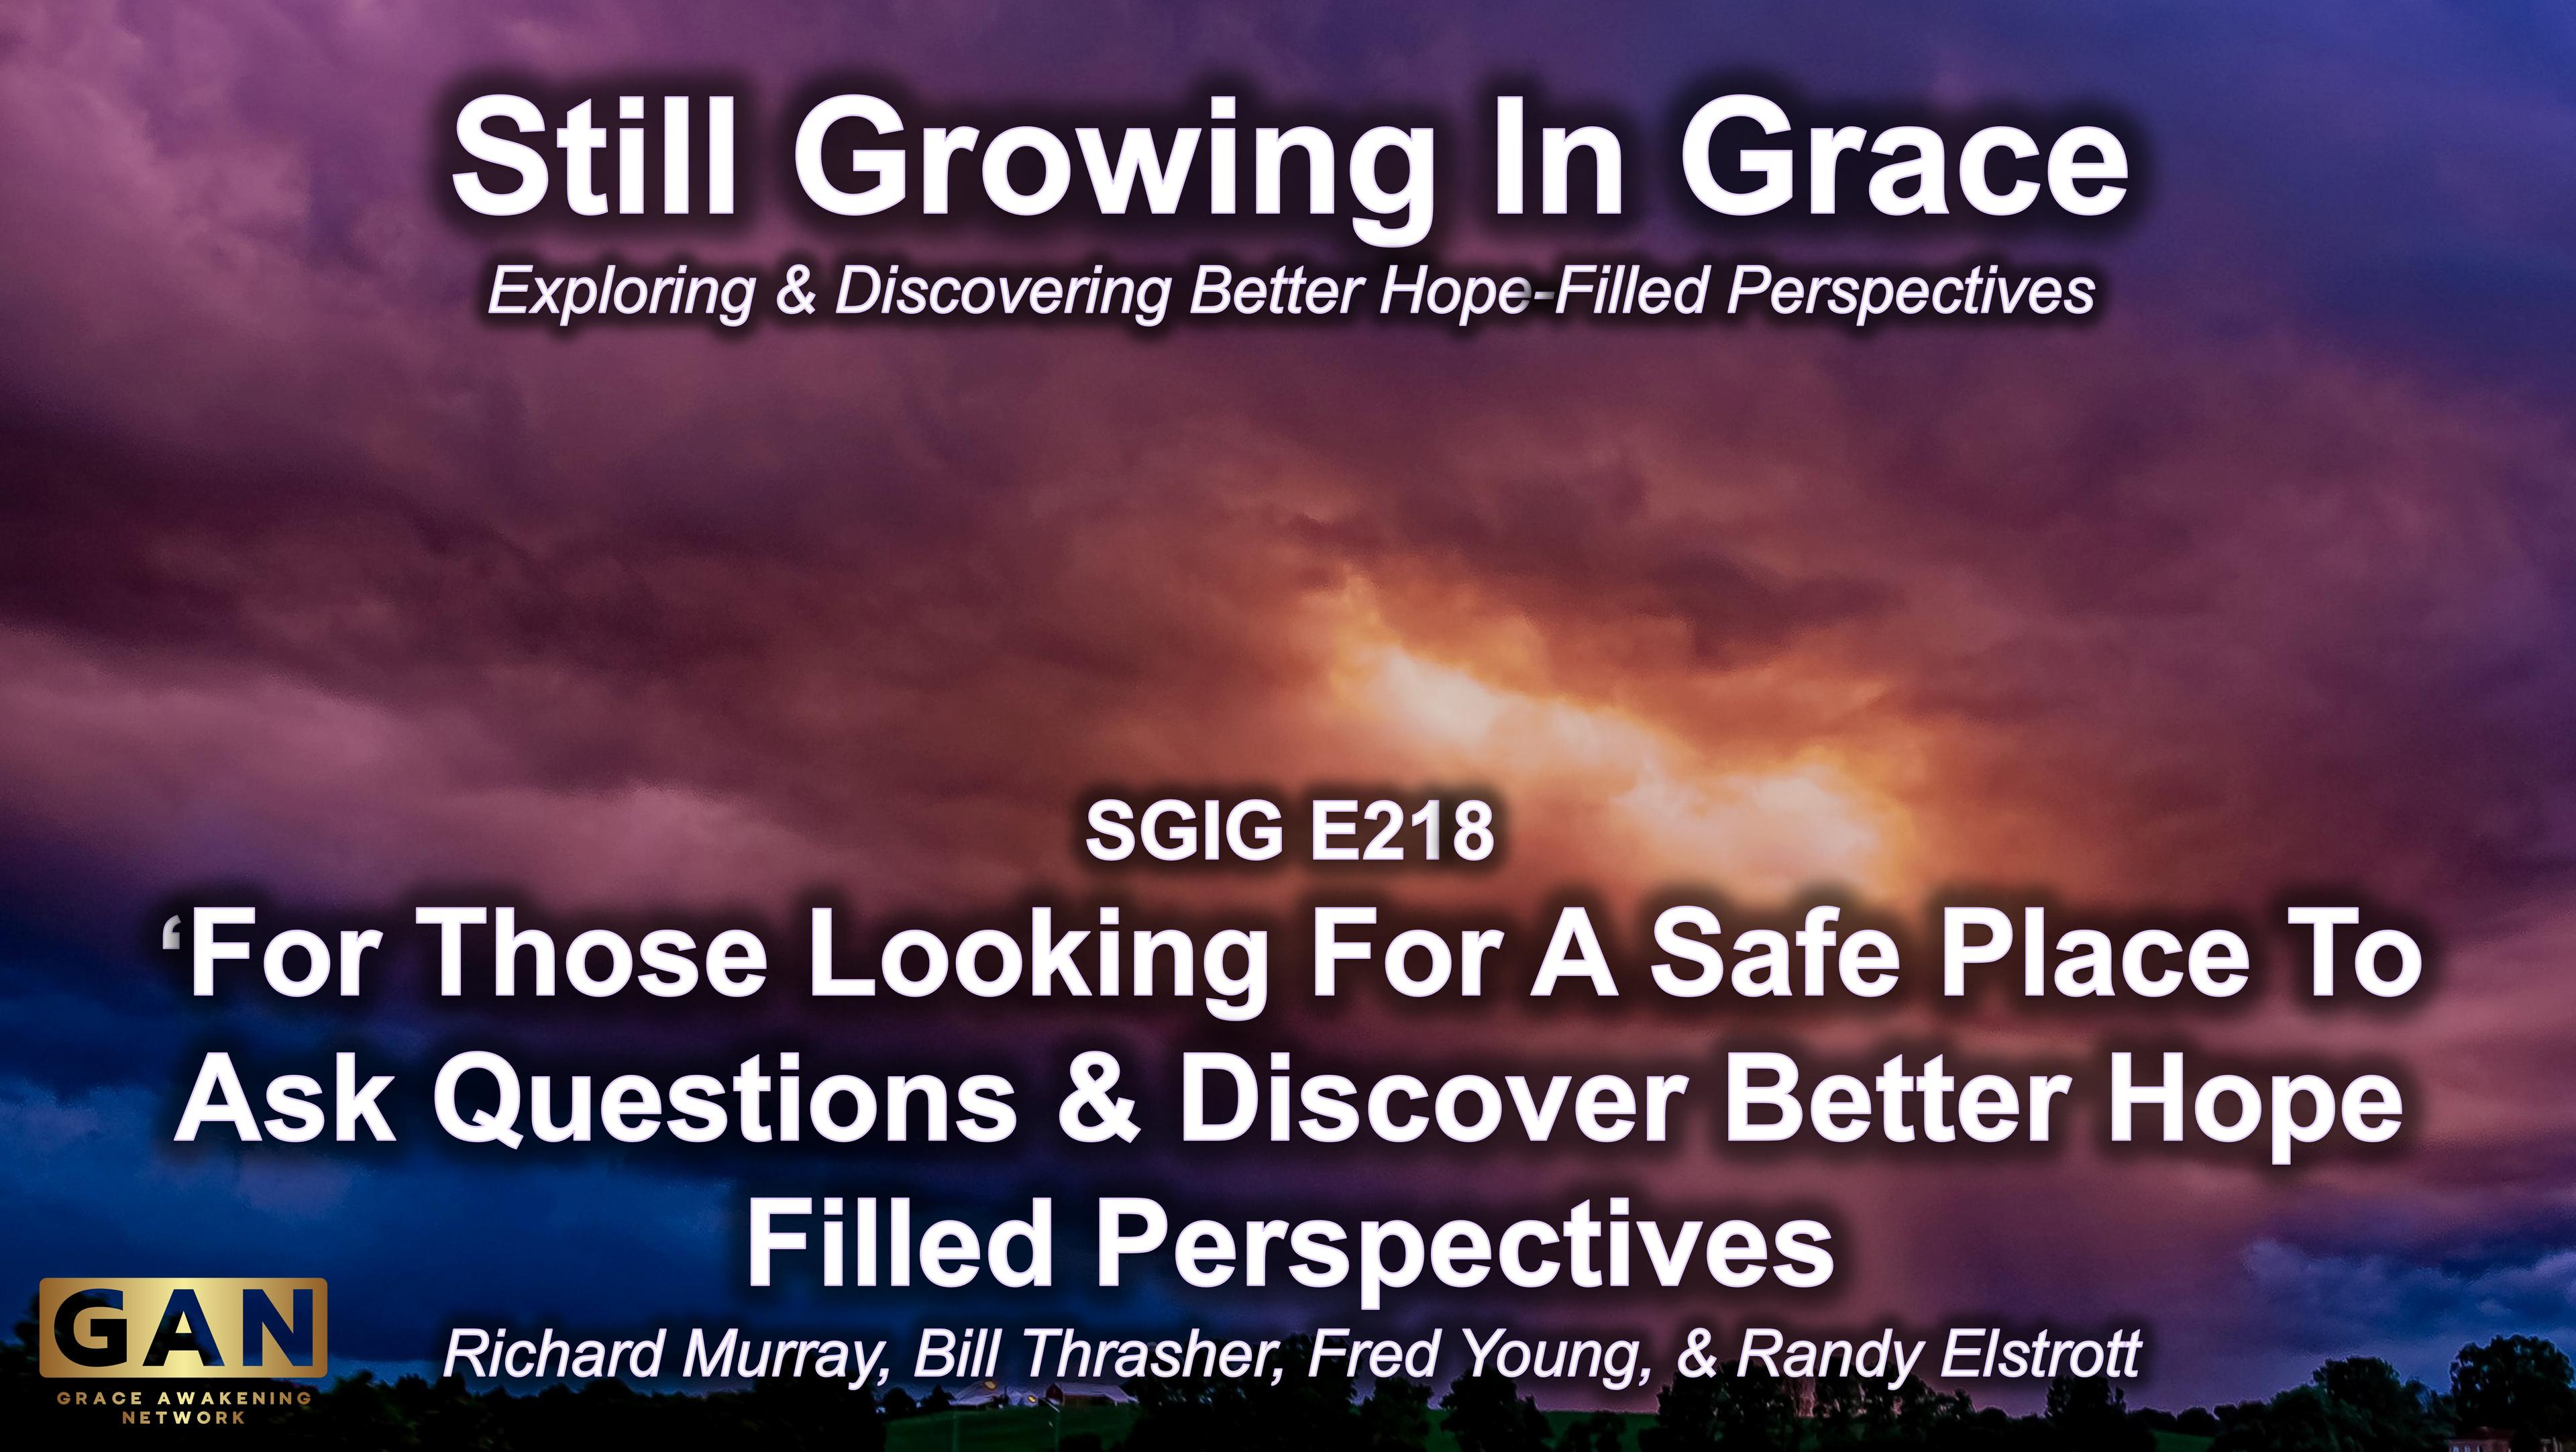 SGIG E218 For Those Looking For A Safe Place To Ask Questions & Discover Better Hope Filled Perspectives - NEW PROGRAM ON GAN